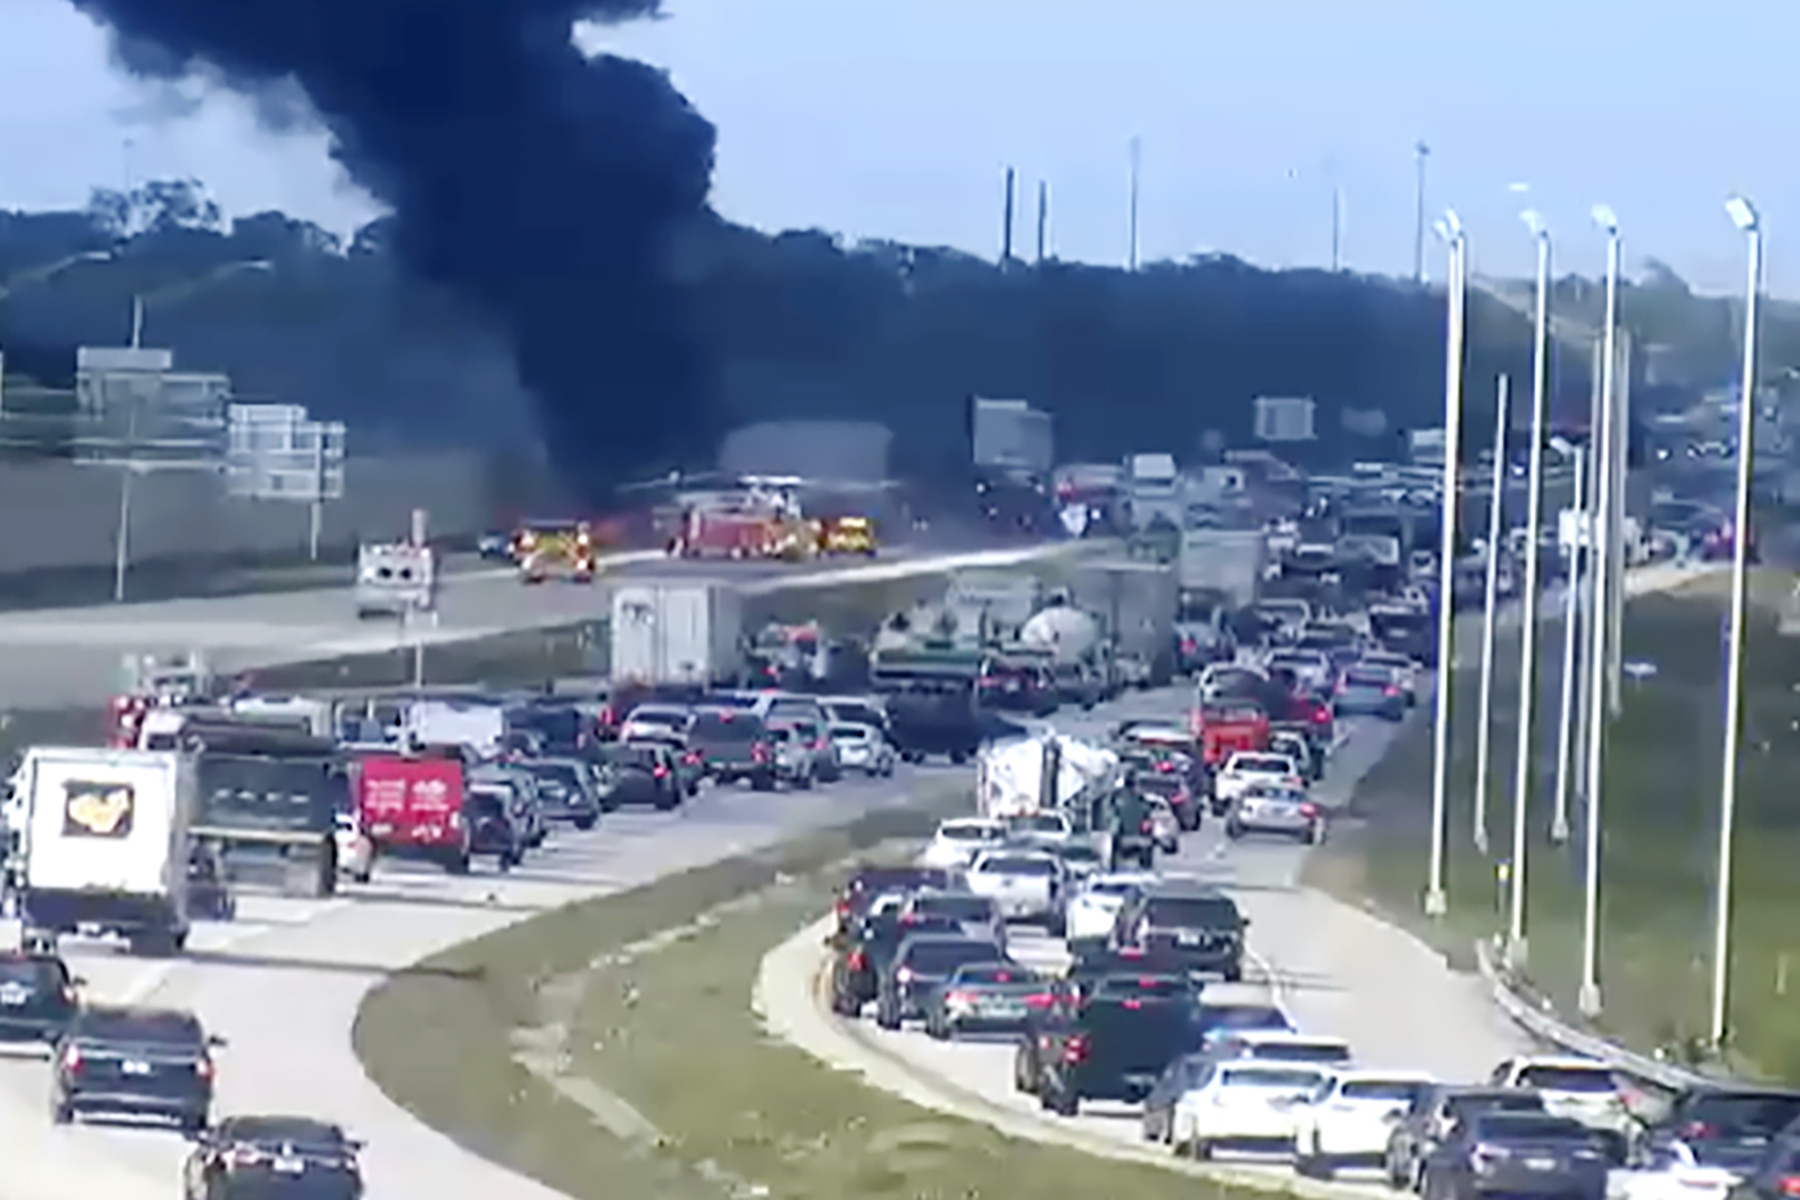 Smoke fills the air after an airplane crashed on Interstate 75 on Friday near Naples, Florida. Two people died in the crash.